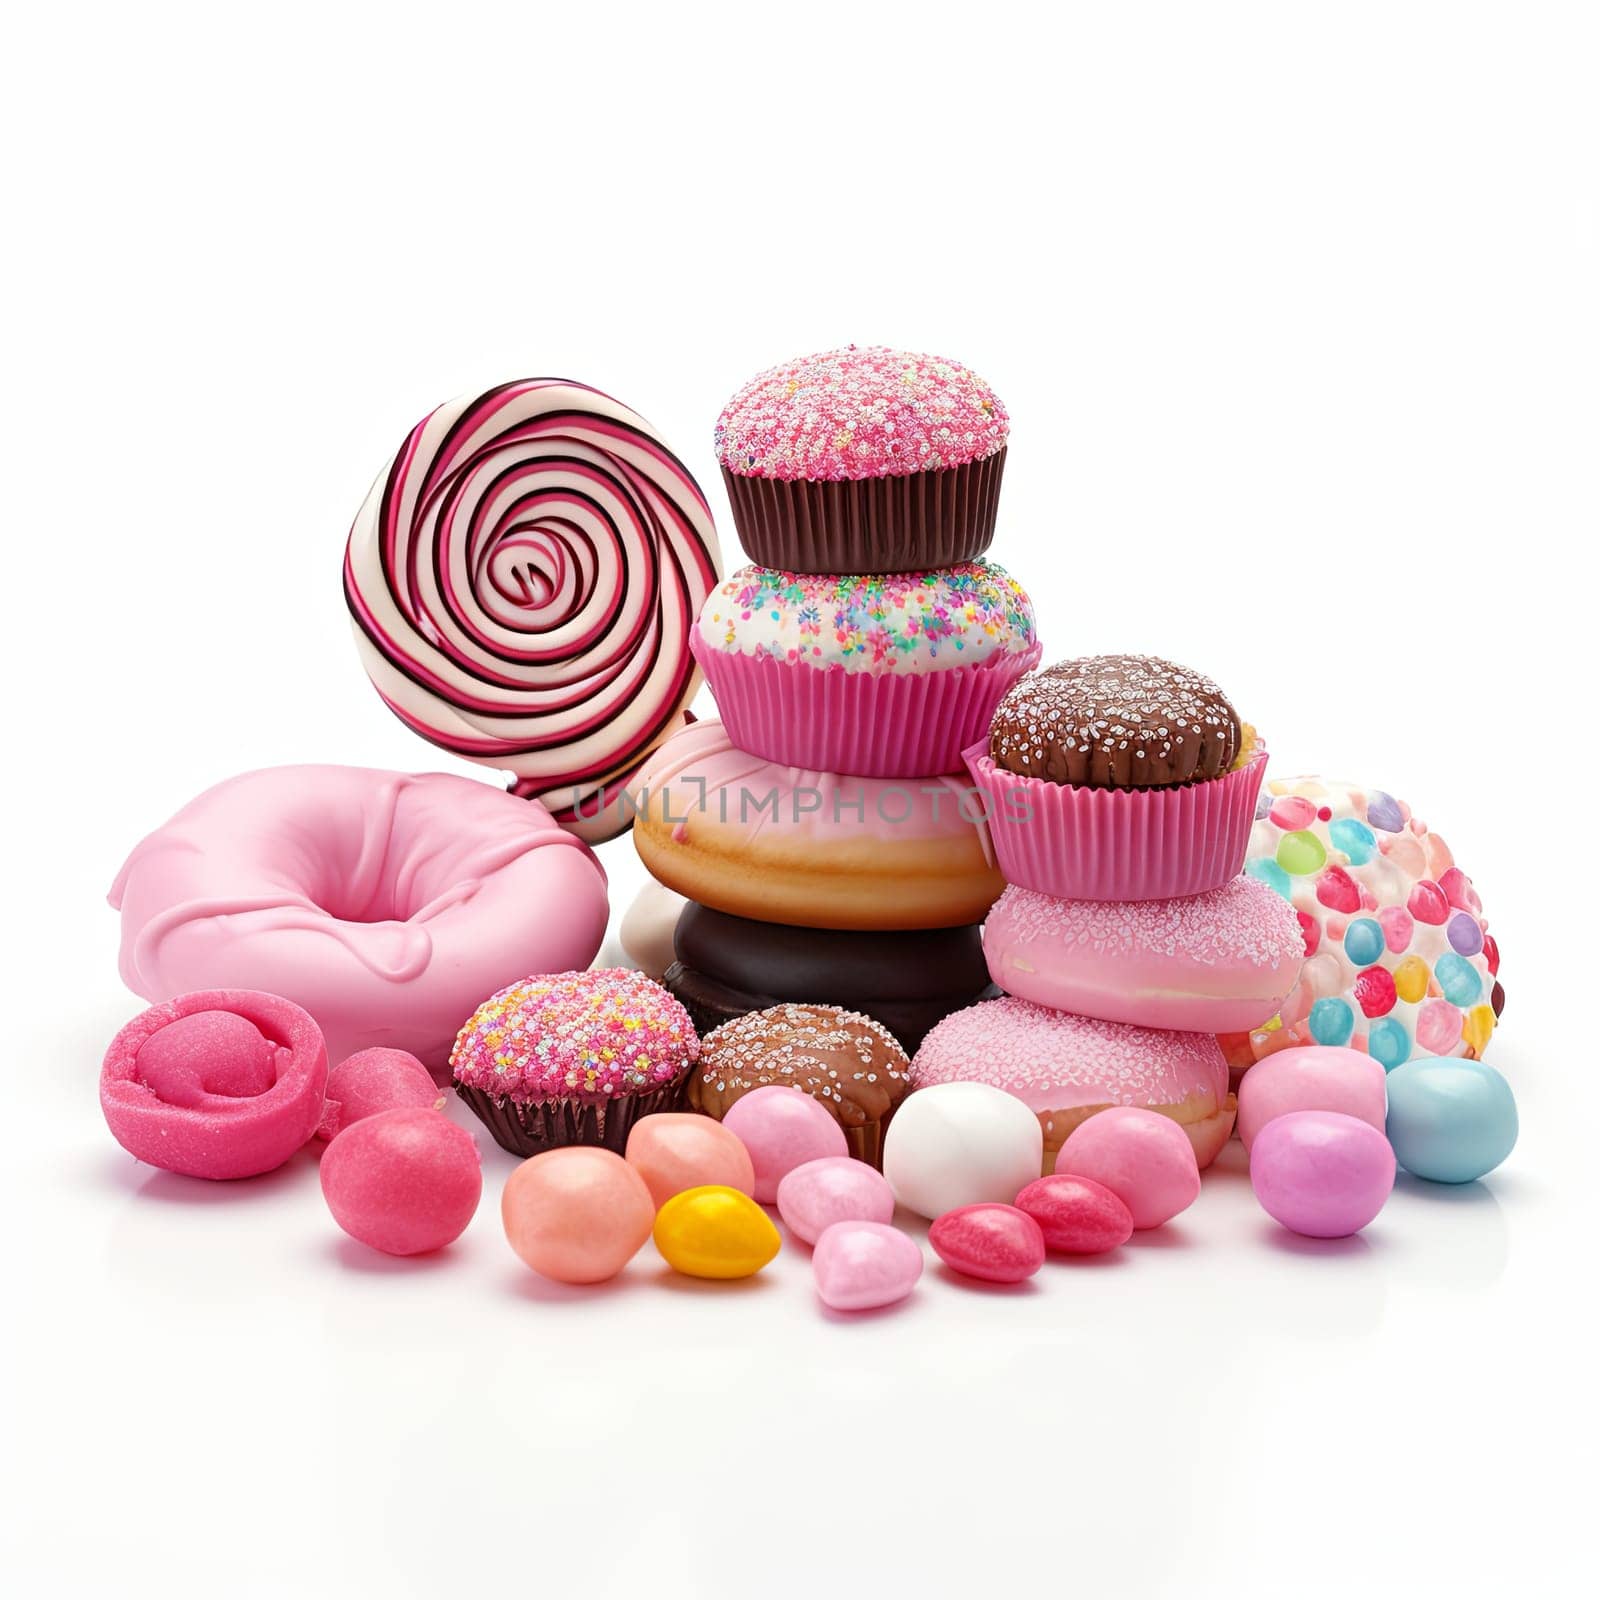 Composition with Donut, Lollipop, Candies, Maffins and Sweets on White Background.